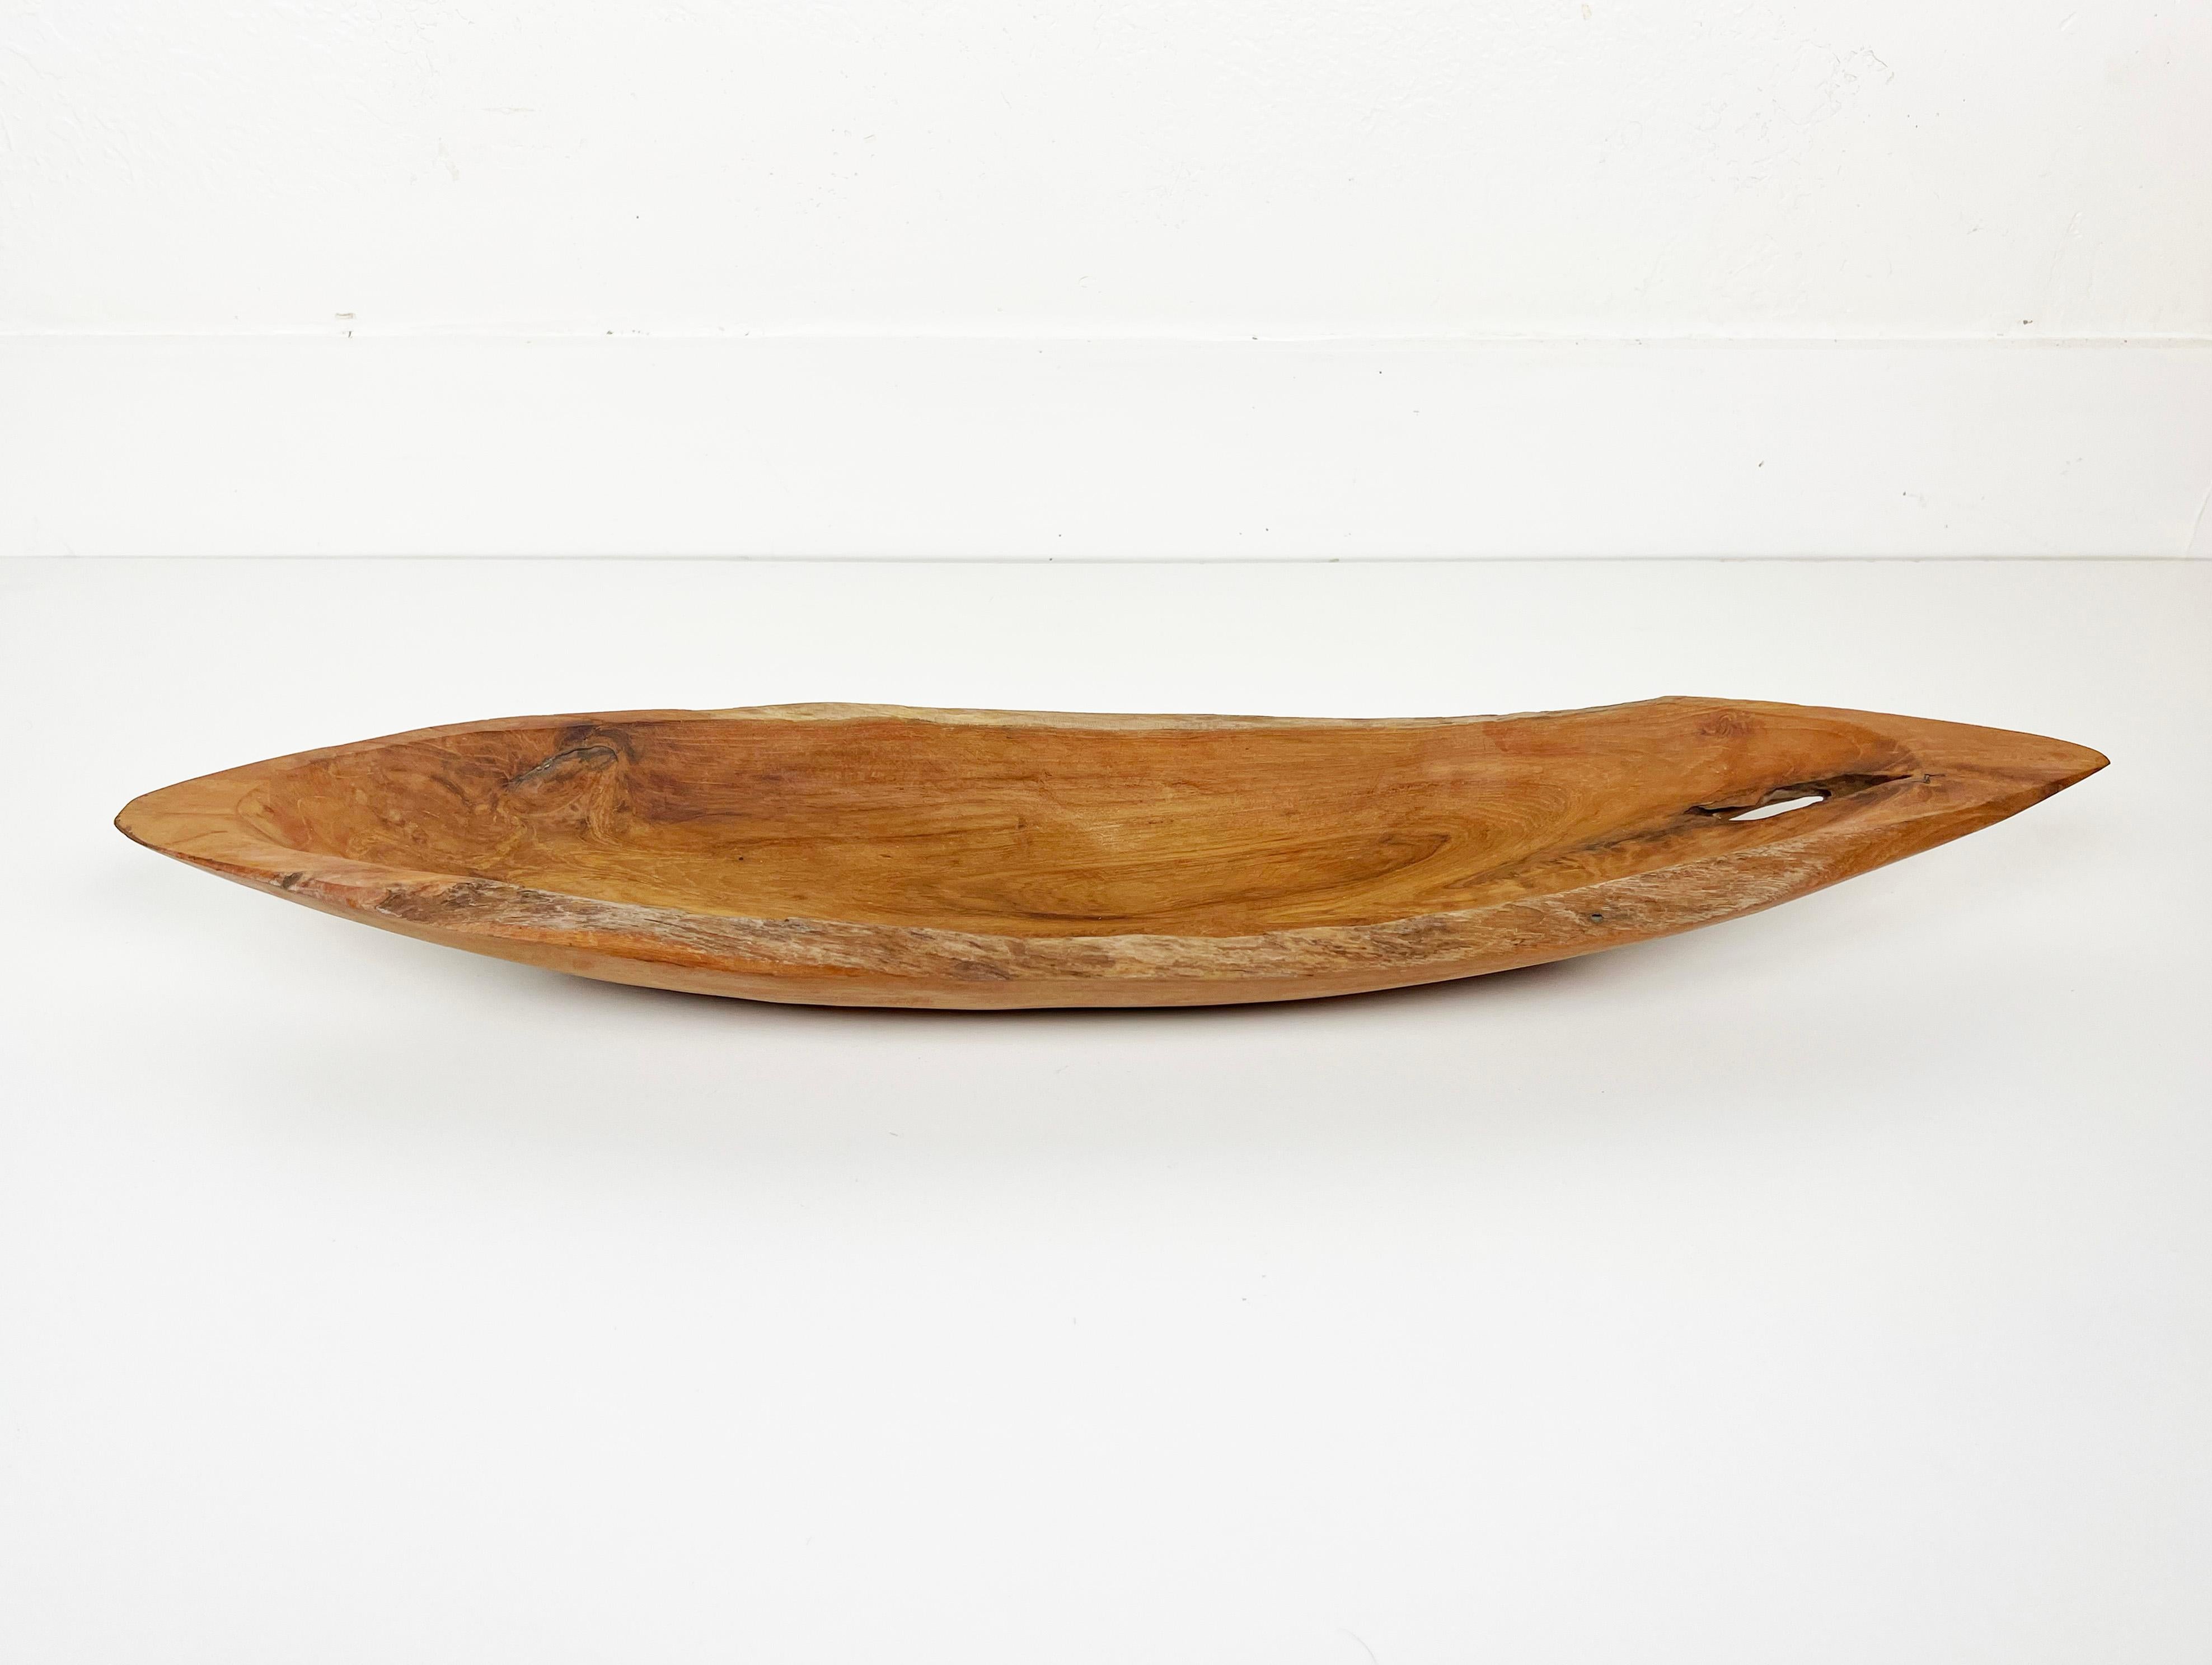 Vintage live-edge long boat shaped bowl carved from solid Teak.

Dimensions: 25